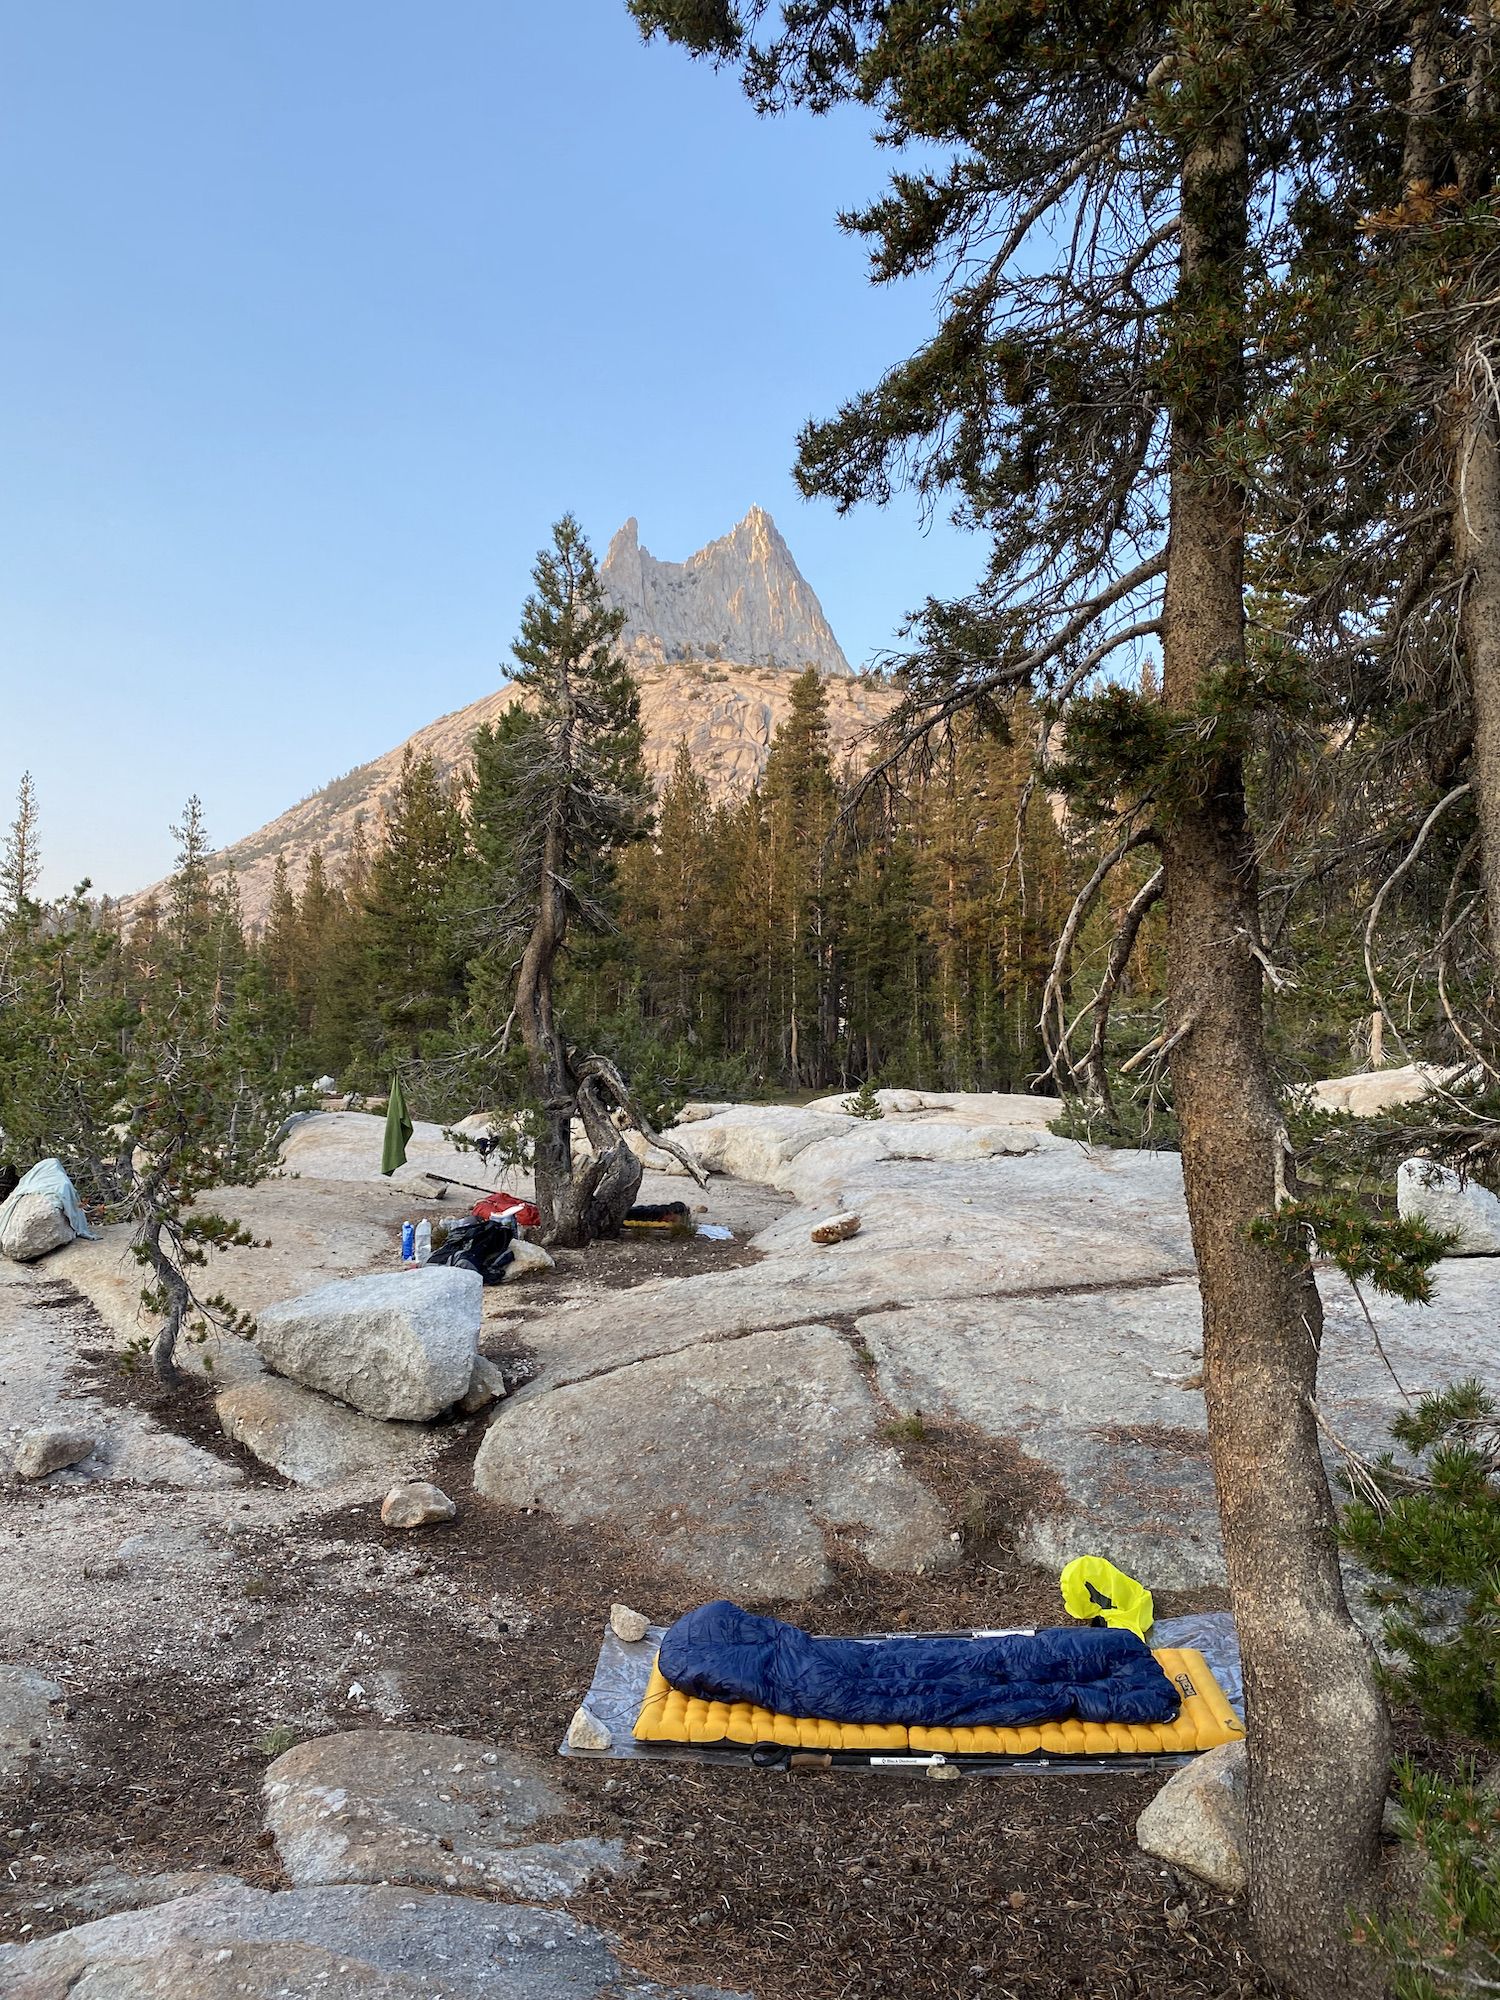 Two cowboy camp setups nestled between granite slabs. A jagged mountain peak in the distance behind the camp.